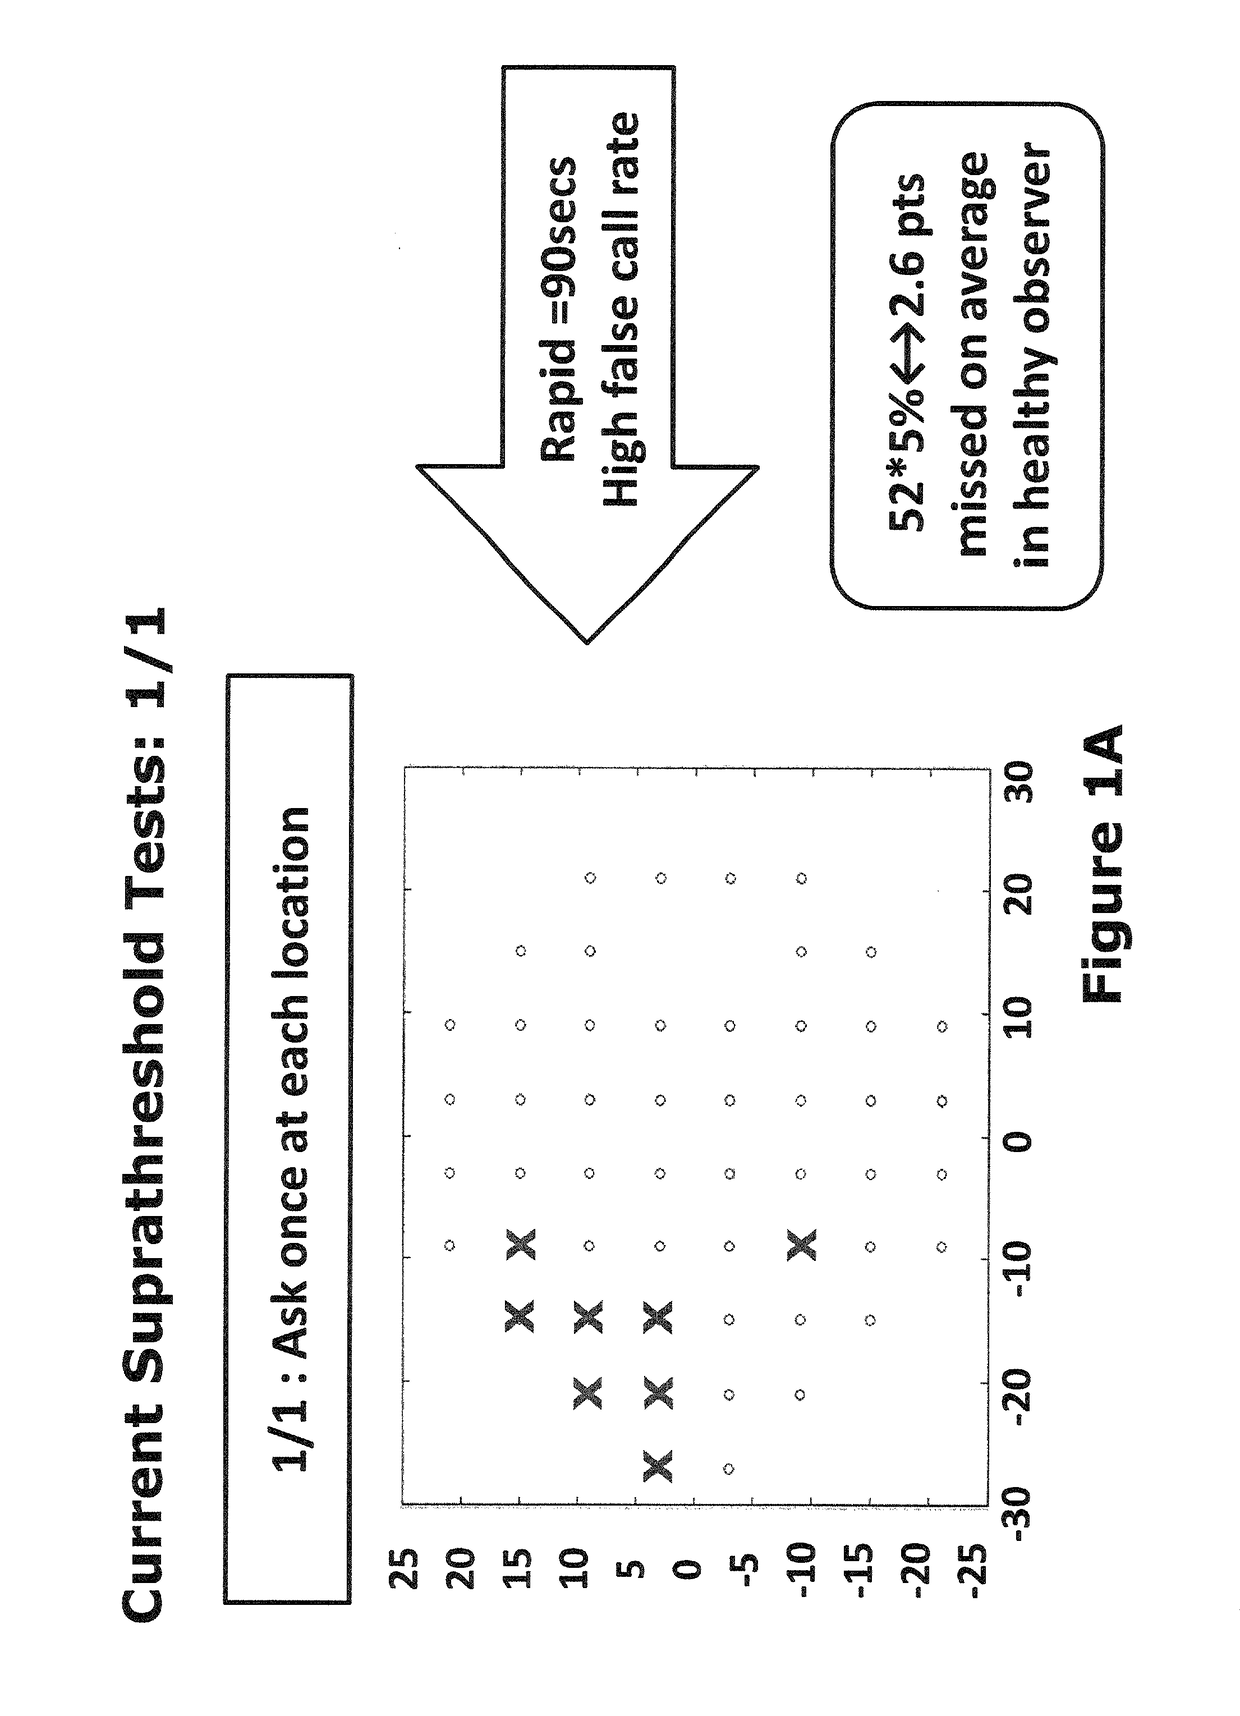 Supra-threshold test and a sub-pixel strategy for use in measurements across the field of vision